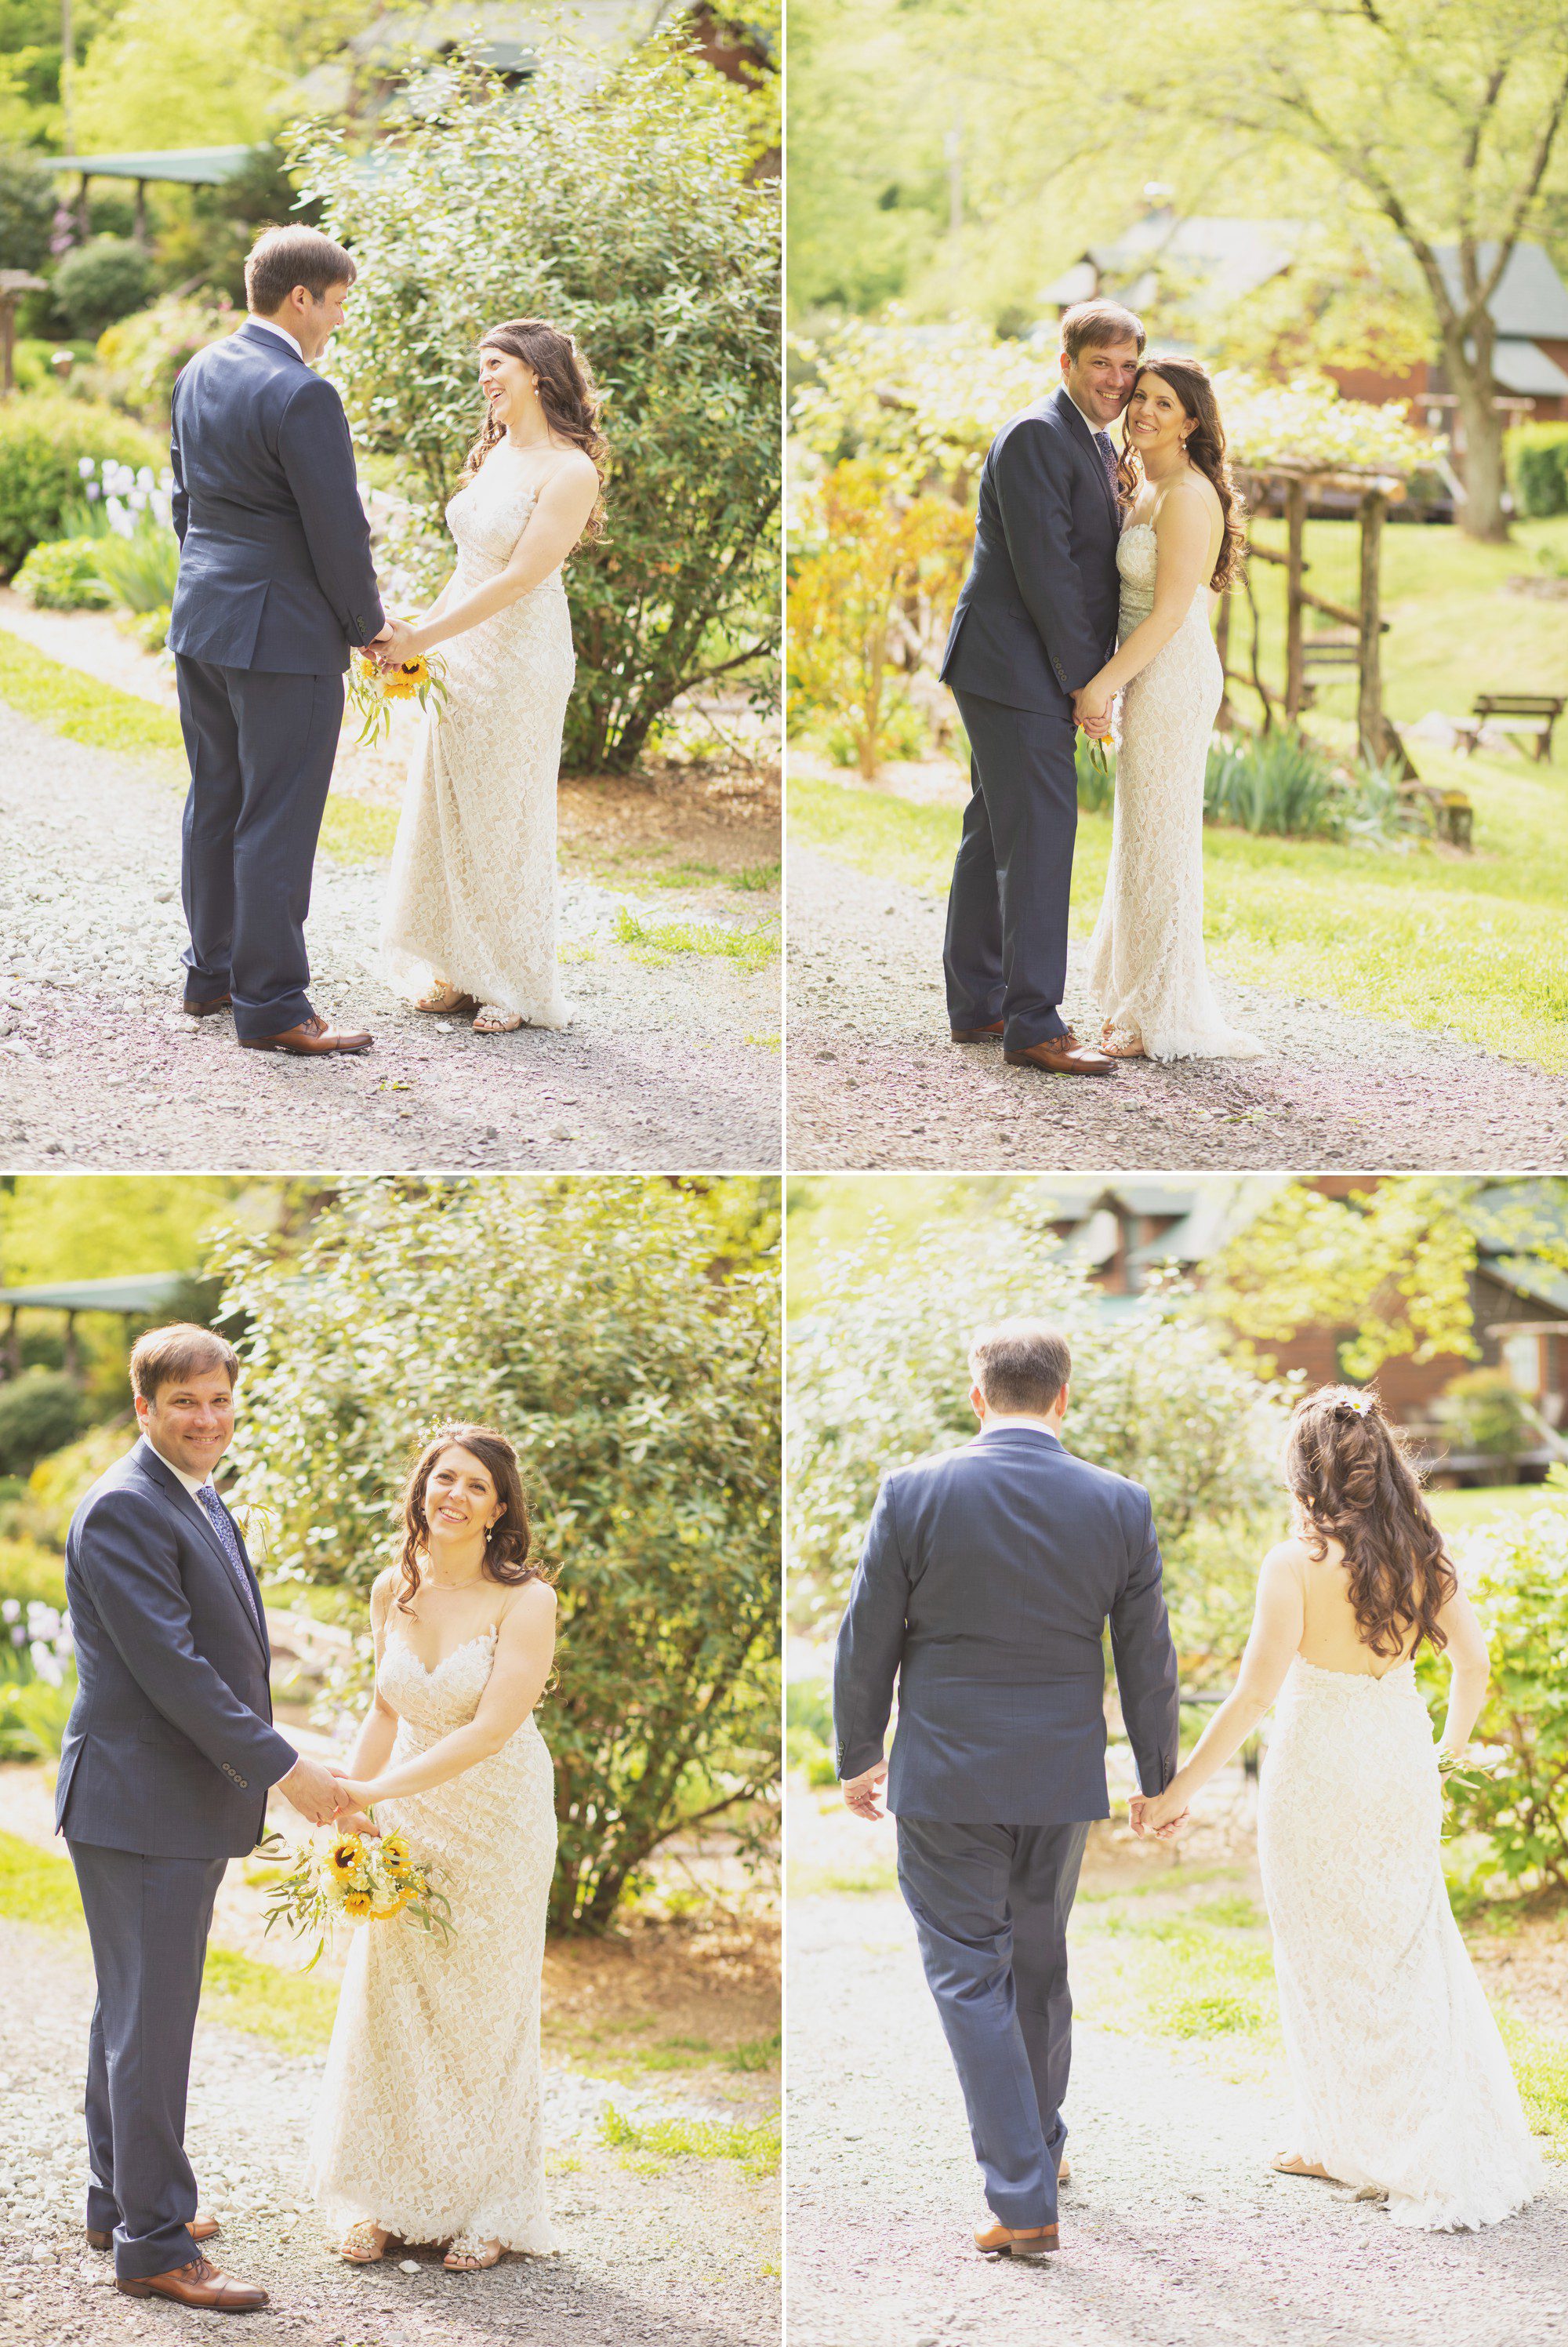 Bride and groom photos in garden after elopement wedding ceremony at Butterfly Hollow in Gordonsville, TN. Photos by Krista Lee Photography. 